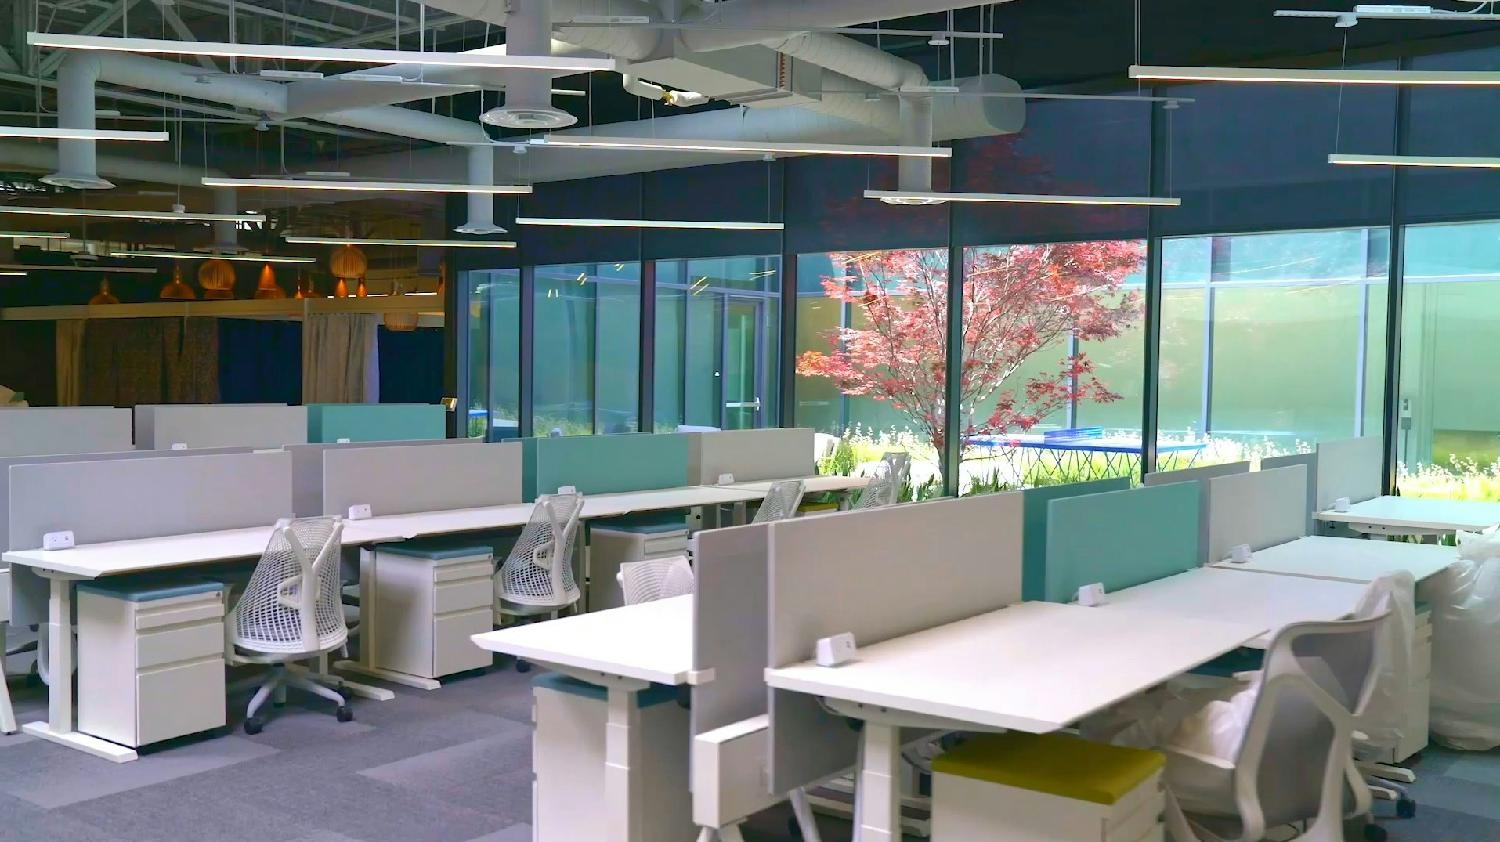 Inside look into our second office building in El Segundo, California that was recently unveiled.